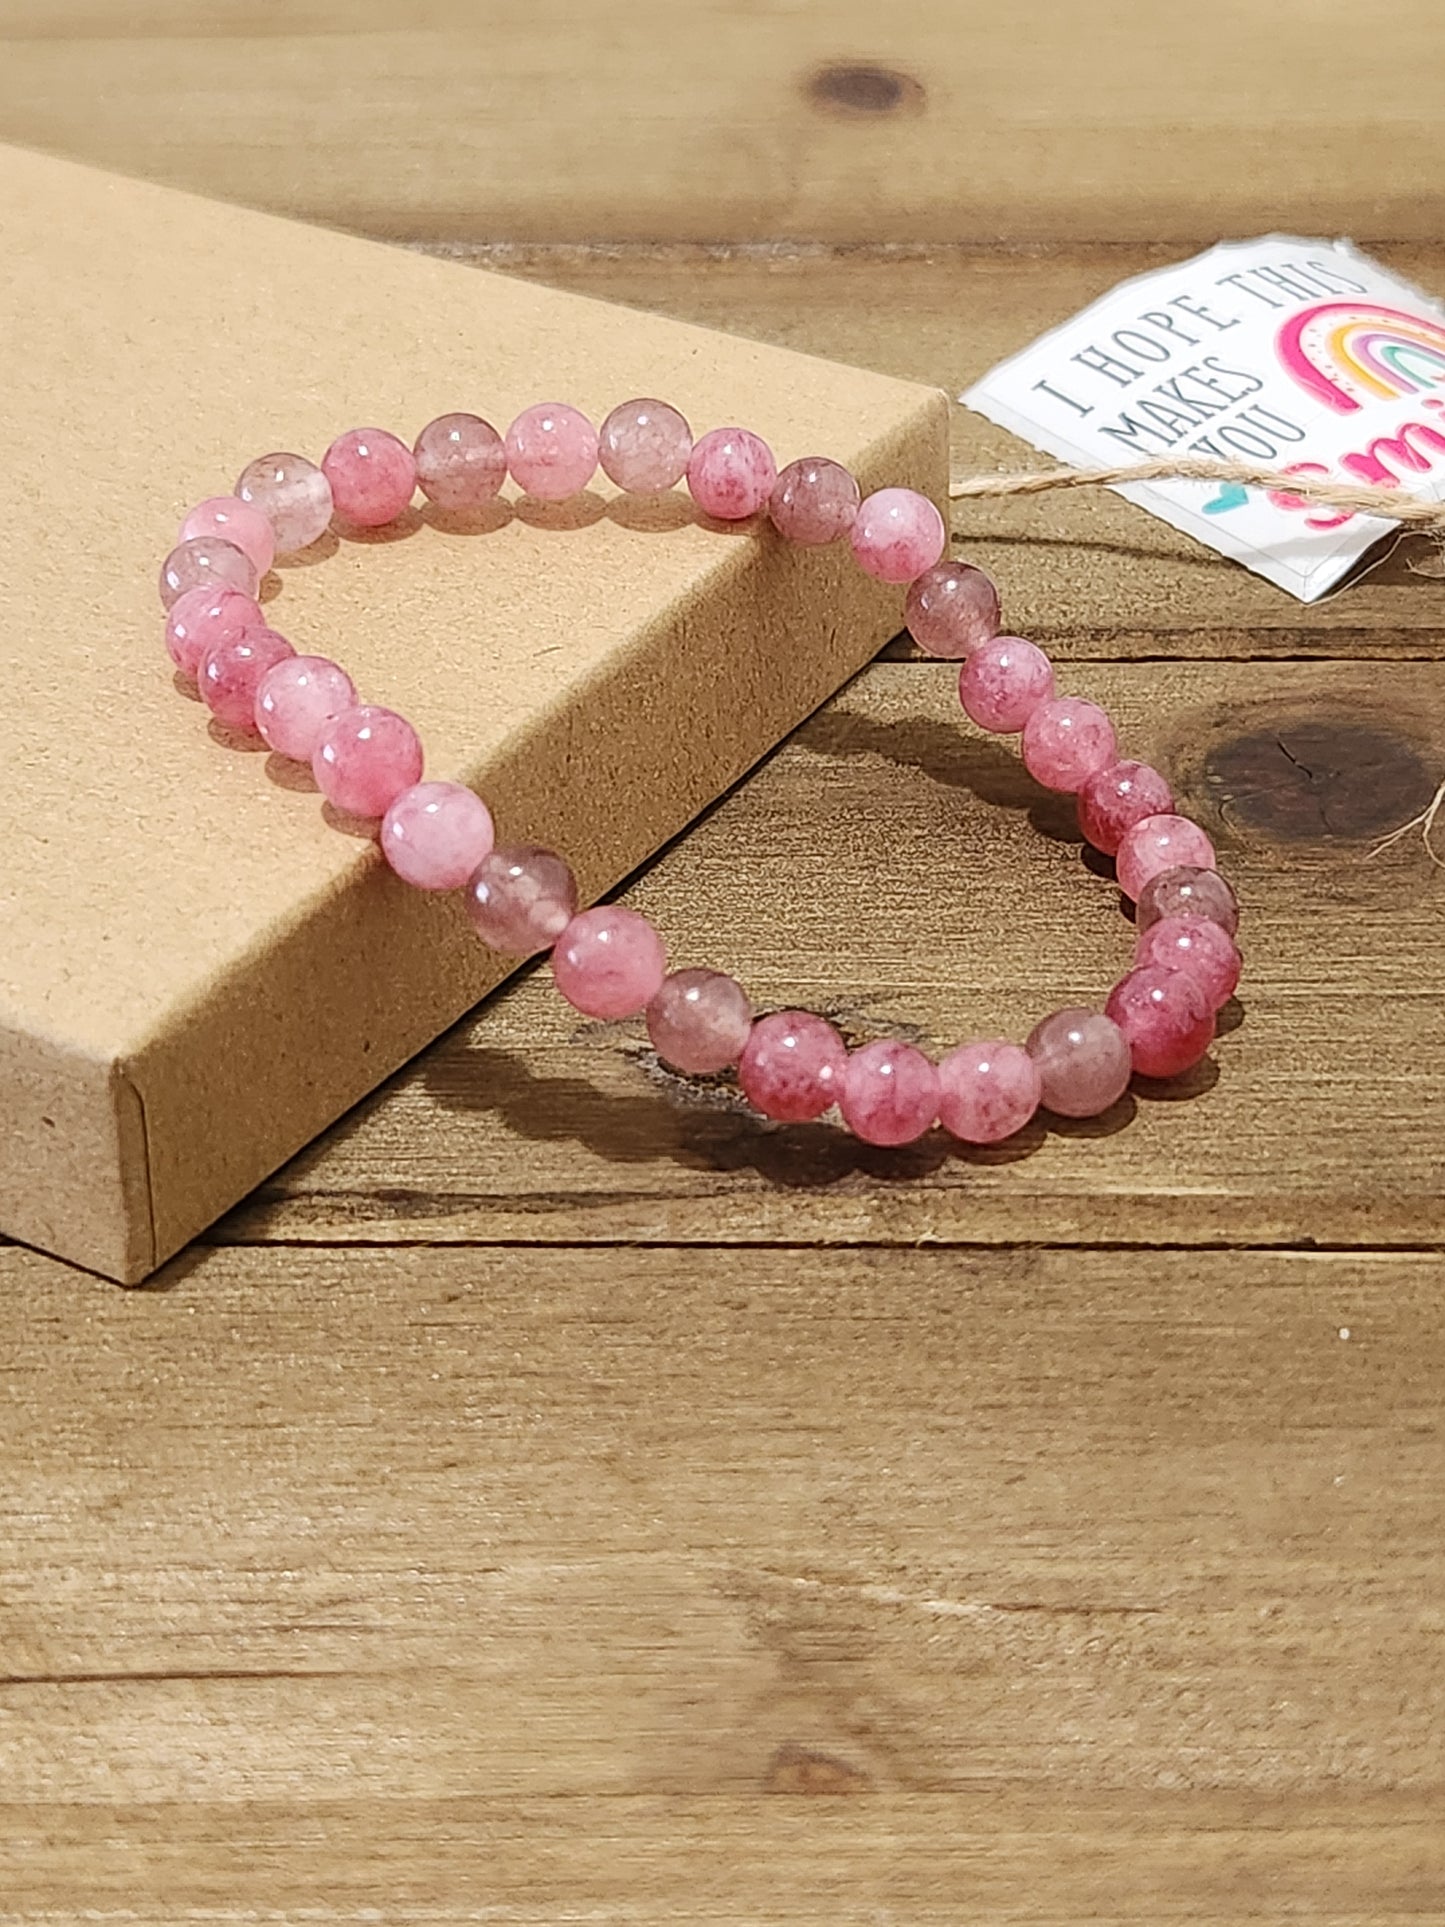 Strawberry Quartz Bracelet - love - passion - well being - unity - tranquility